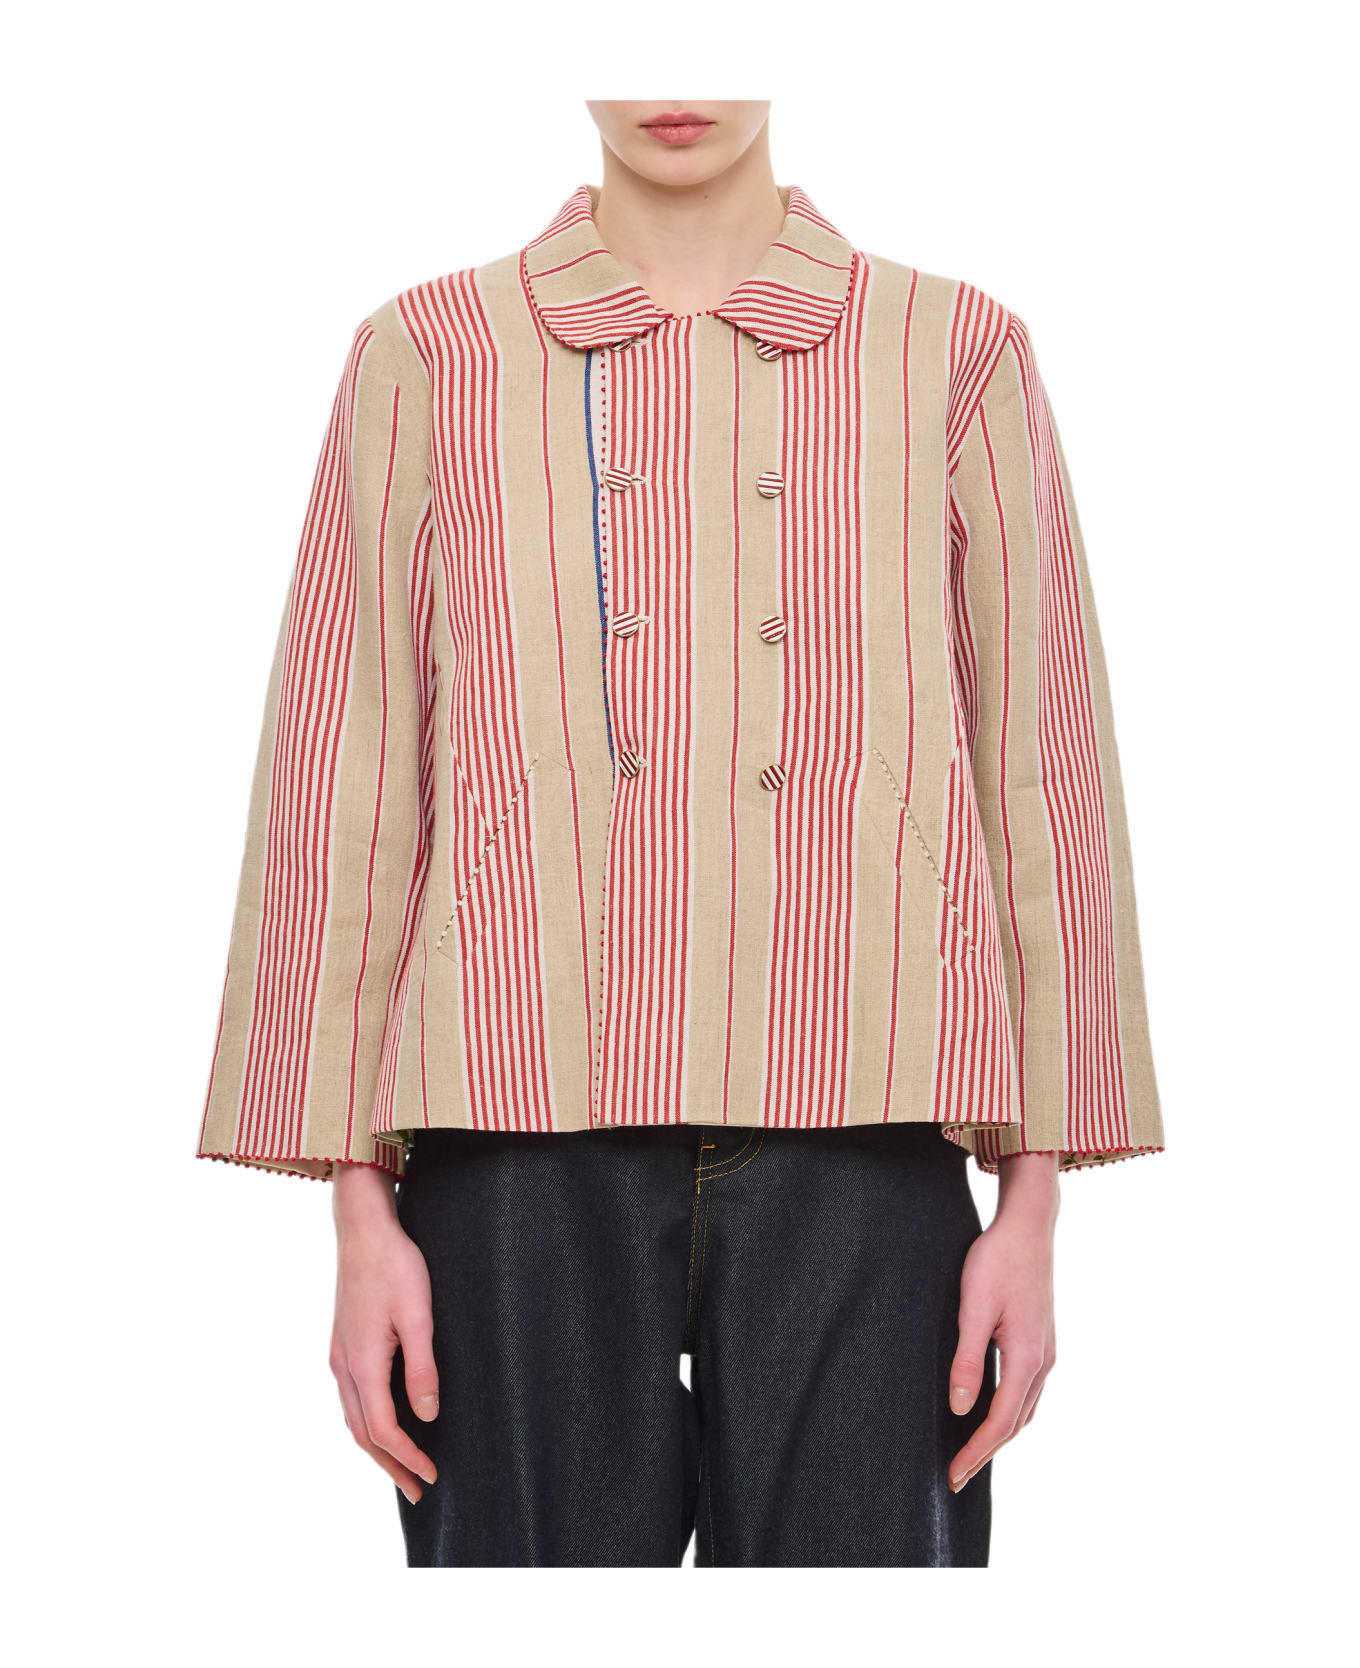 Péro Cotton And Linen Double Breasted Jacket - As Multi